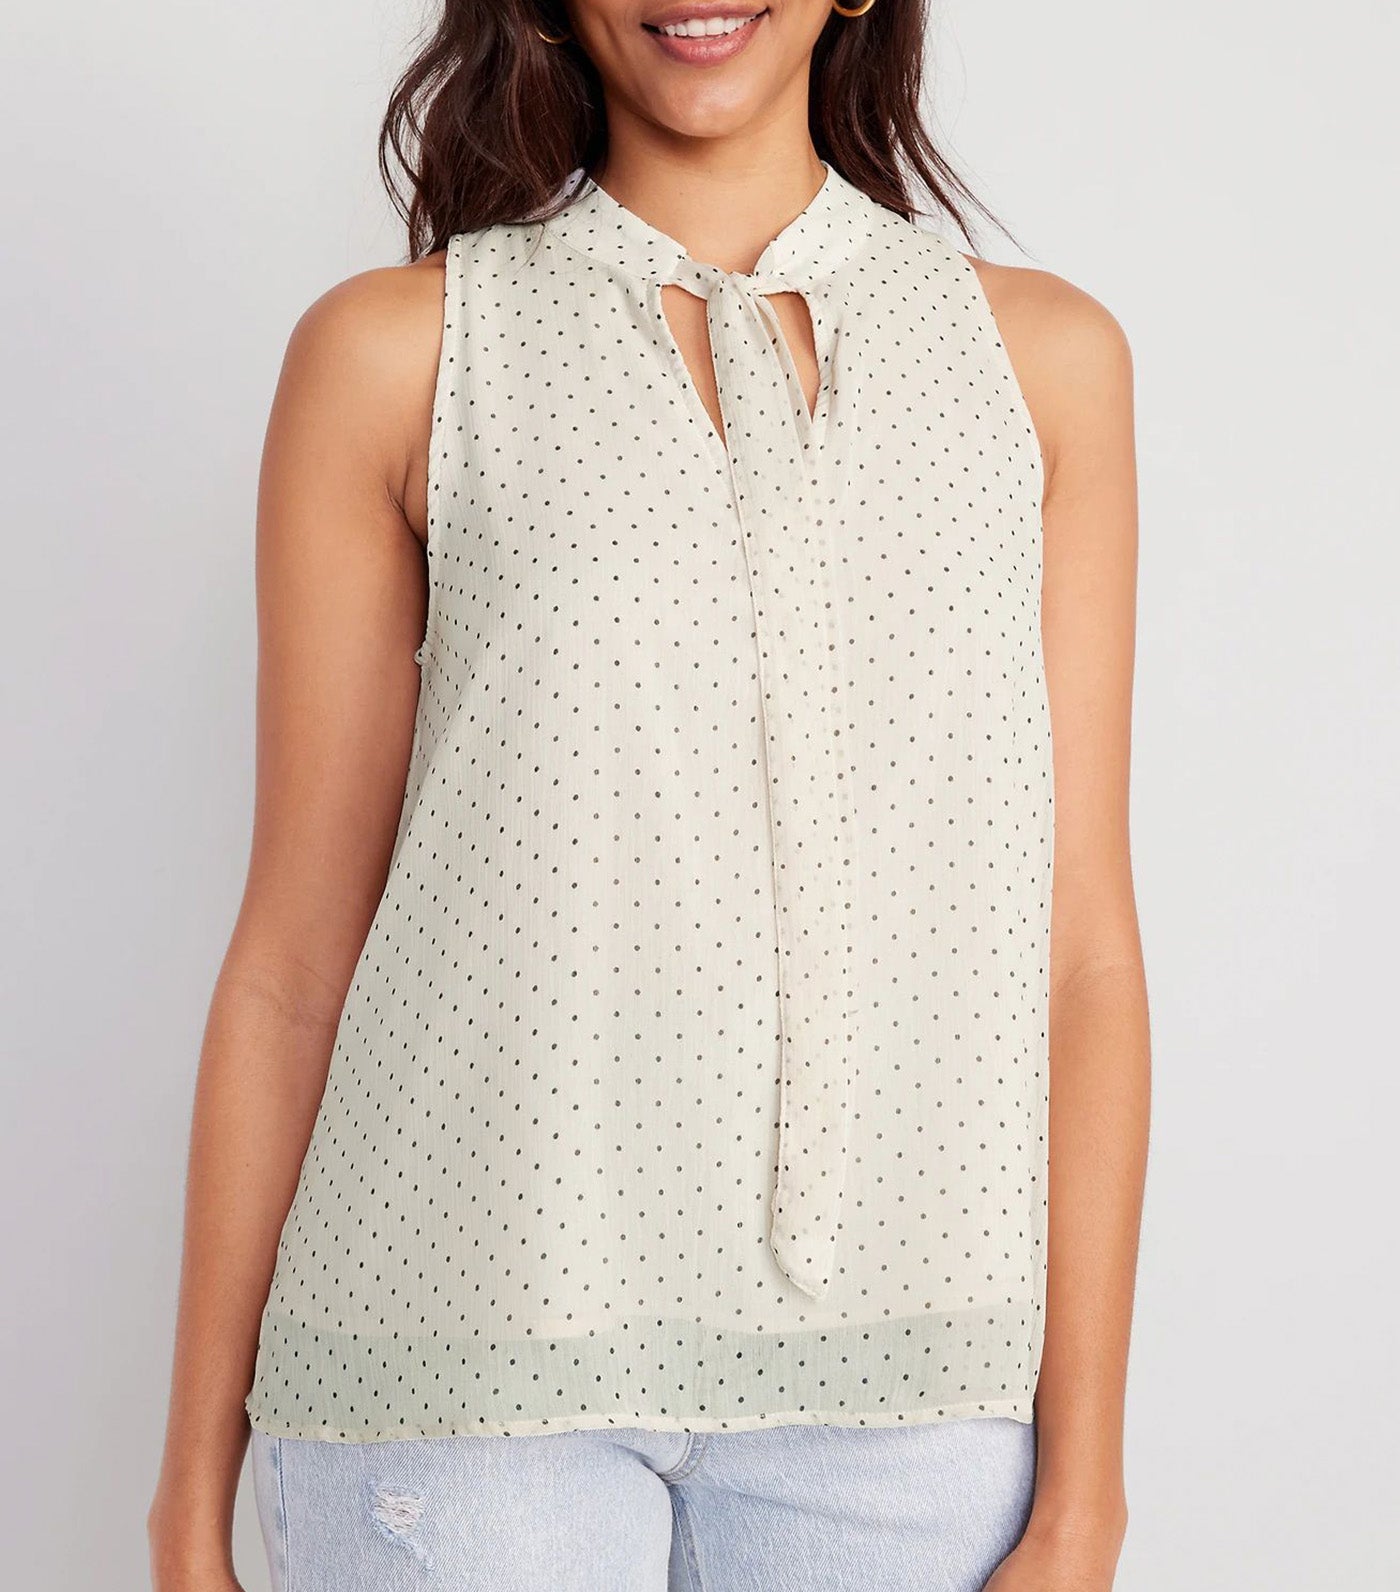 High Neck Bow-Front Chiffon Top for Women White Dots